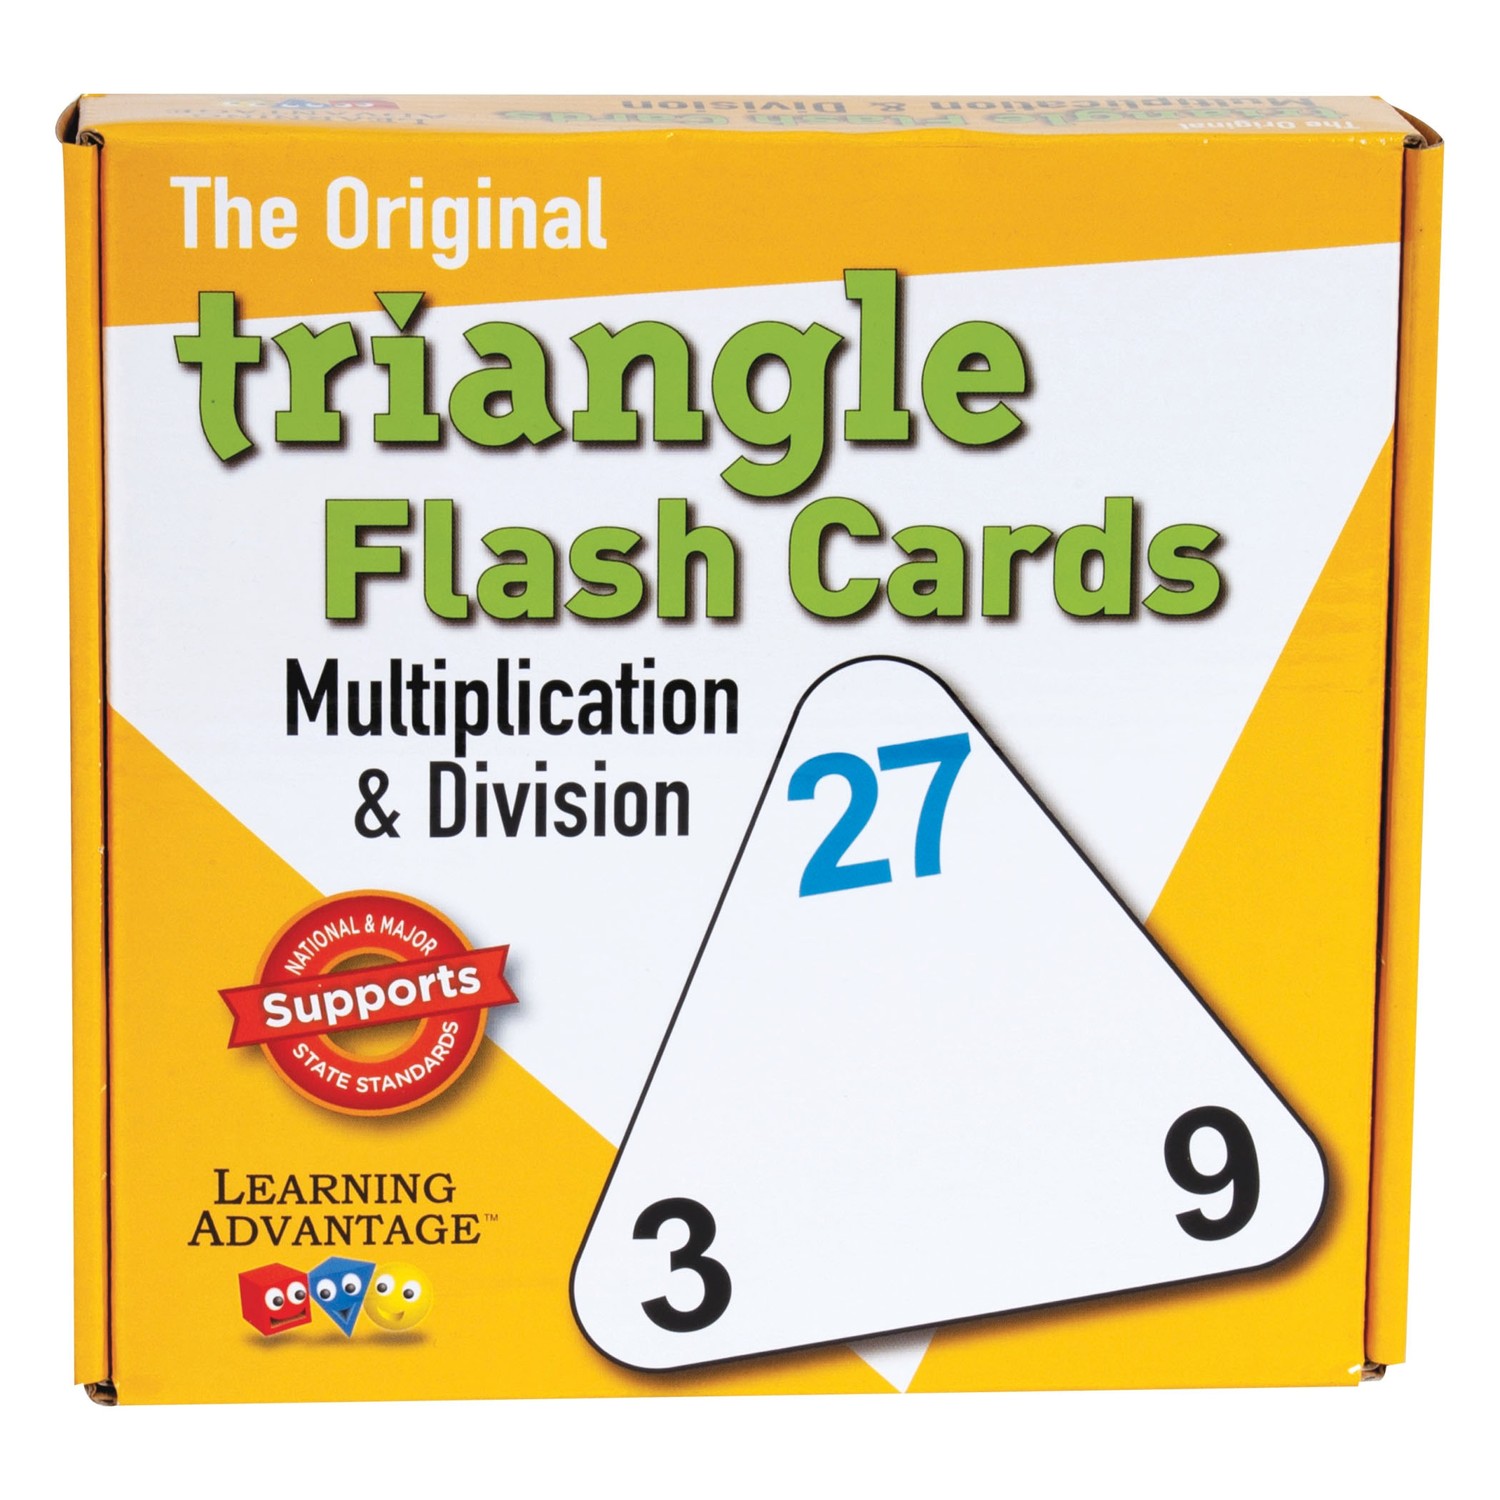 The Original Triangle Flash Cards - Multiplication & Division - Set of 20